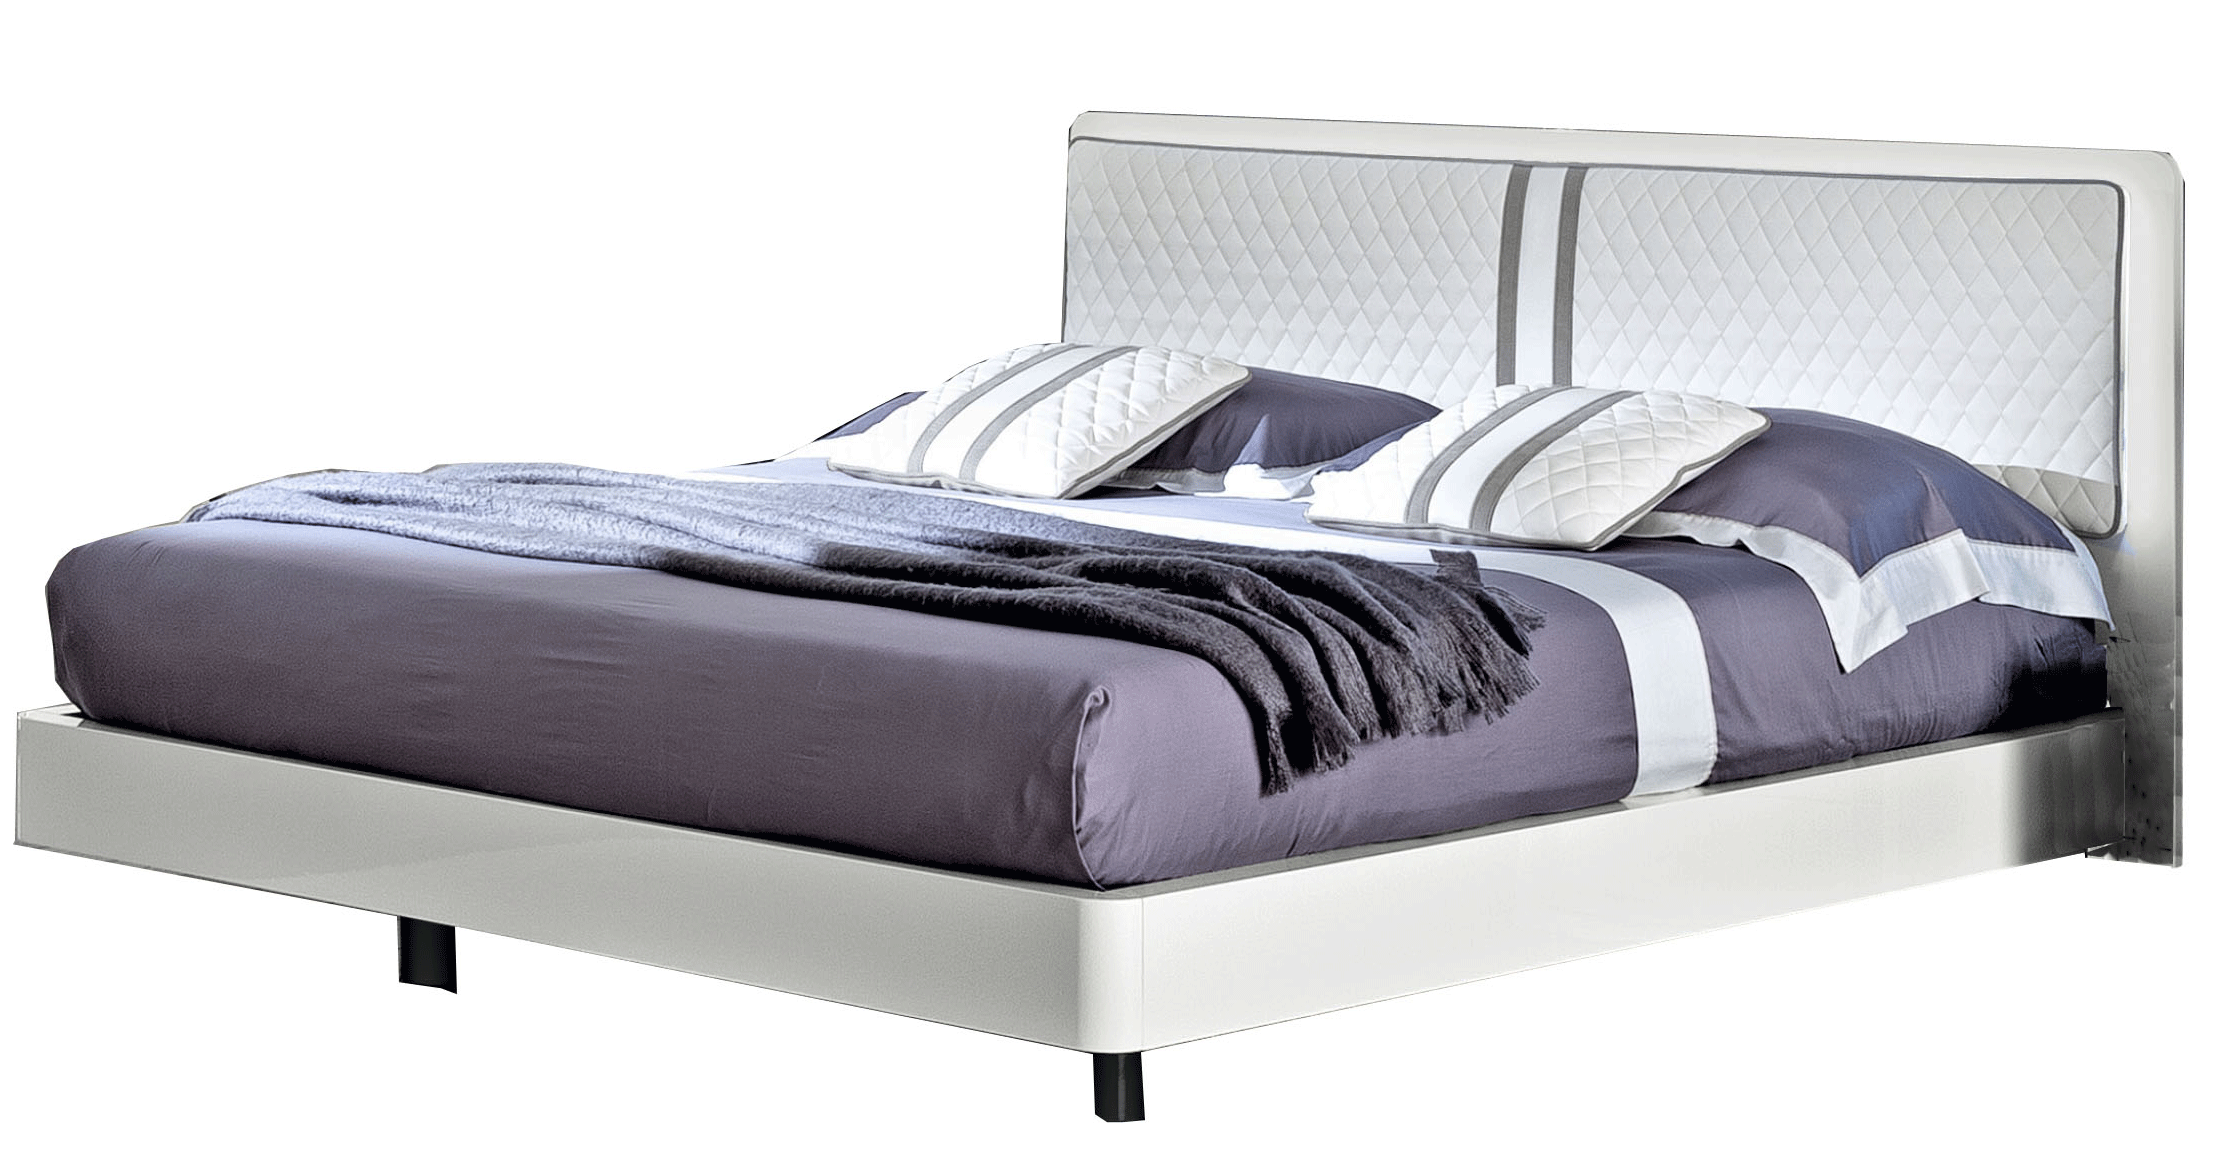 Brands Camel Modum Collection, Italy Dama Bianca Bed